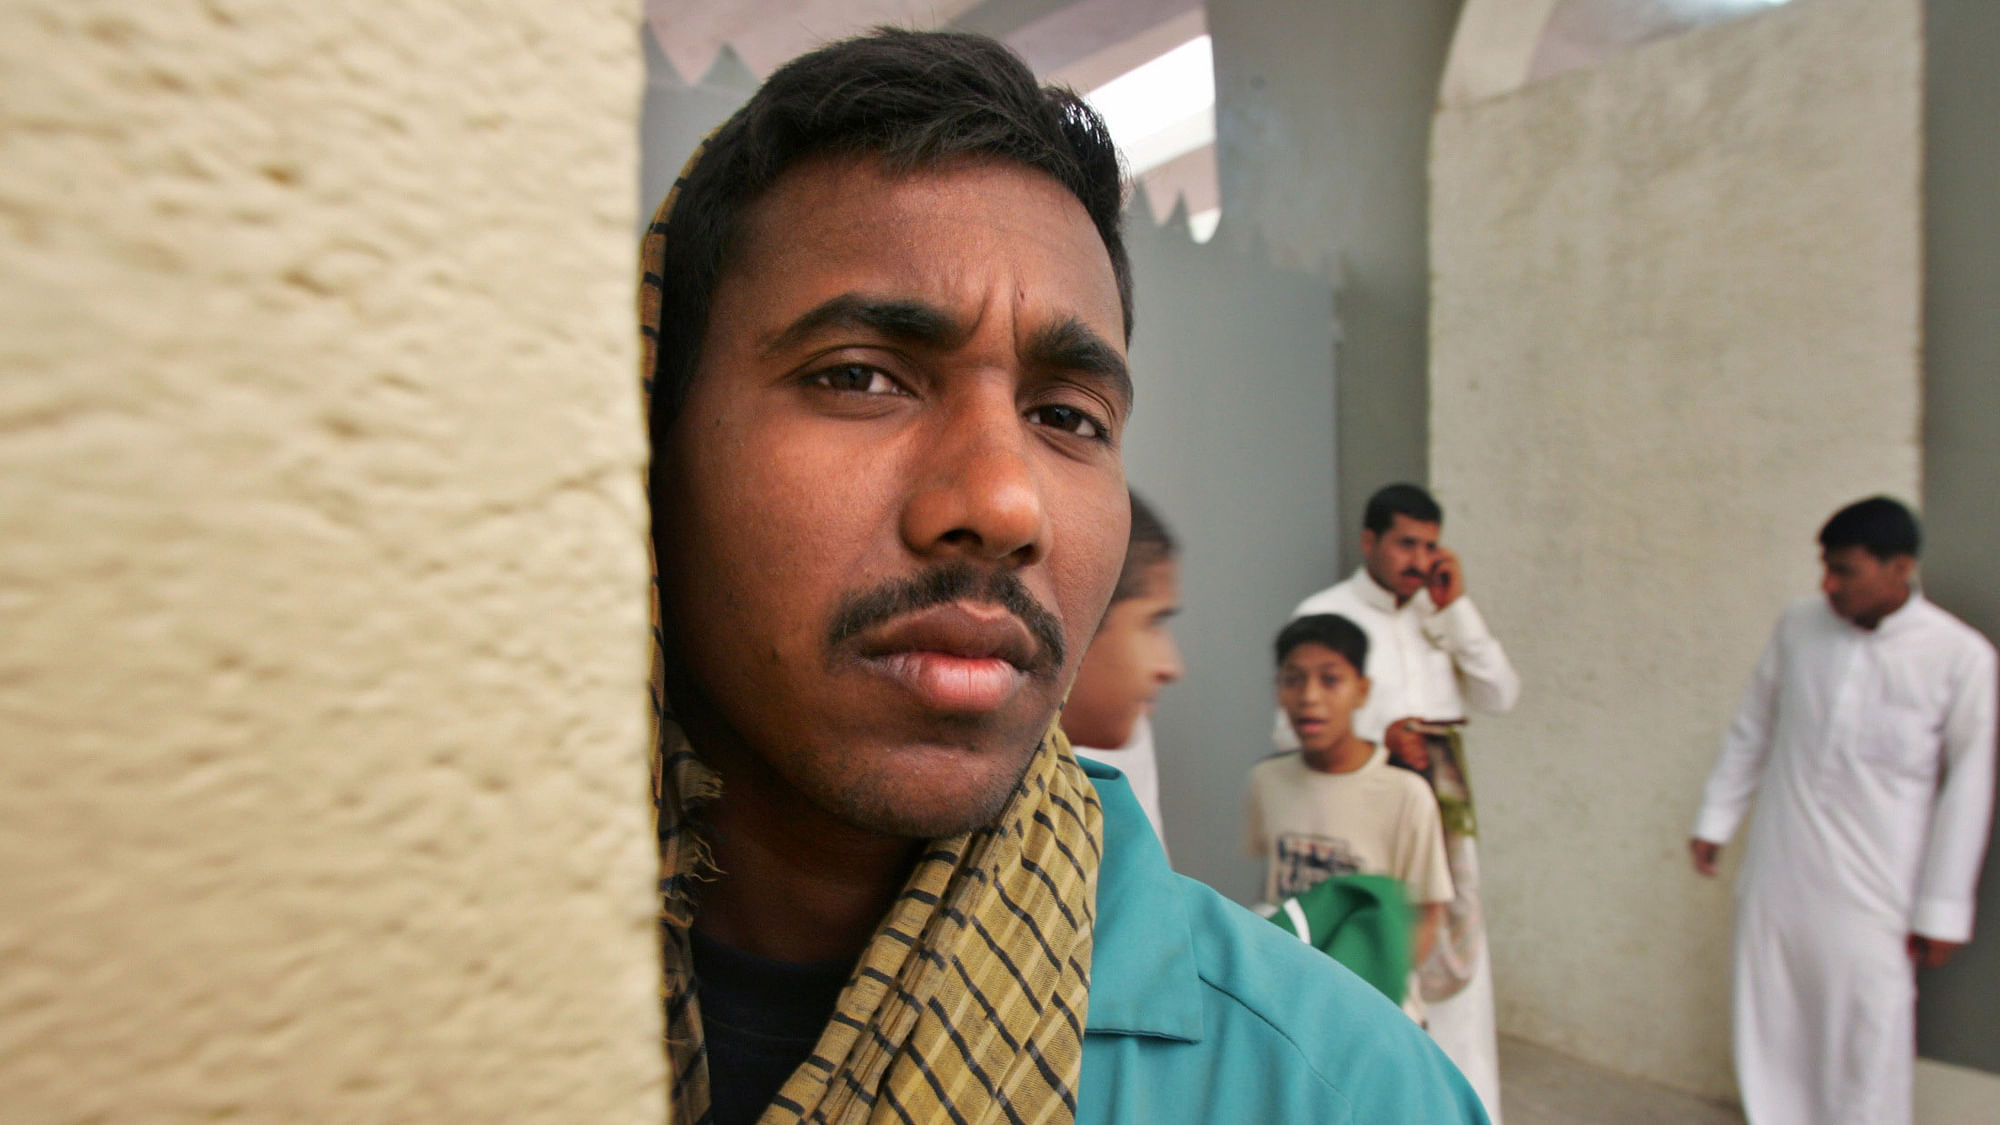 File photo of an Indian labourer in Saudi Arabia. (Photo: Reuters)